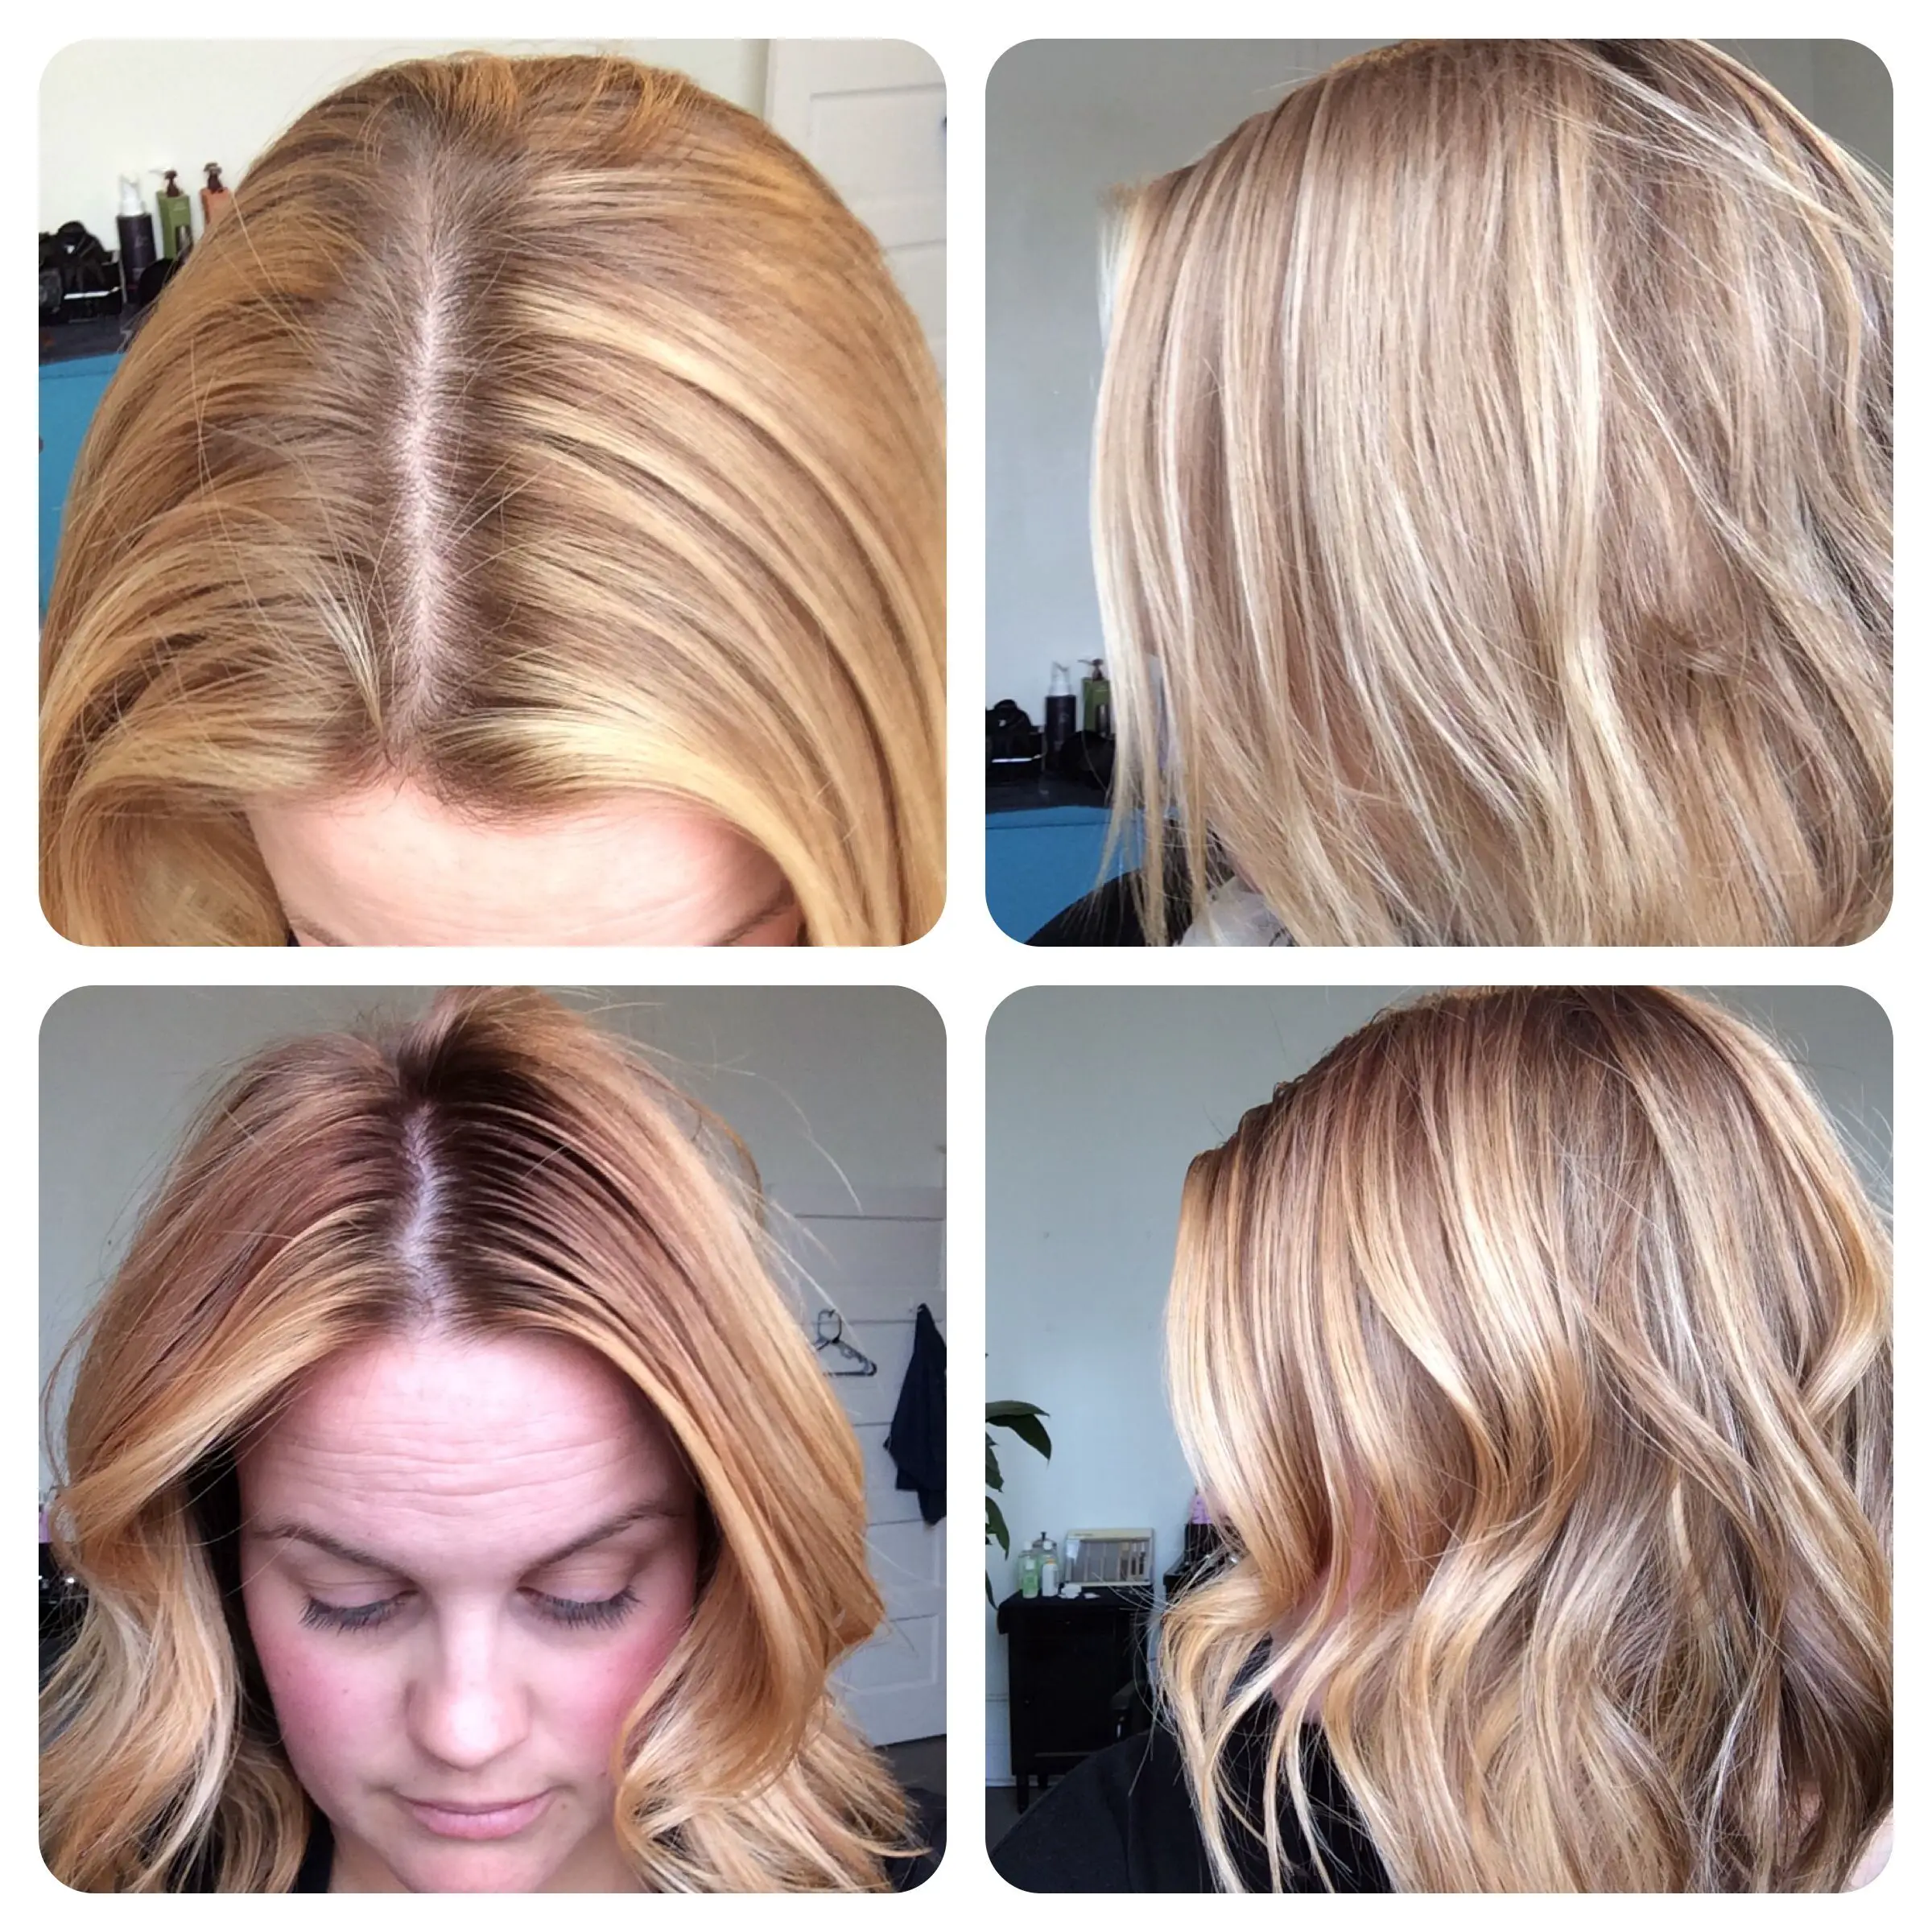 Cellophane Hair Treatment Pros And Cons